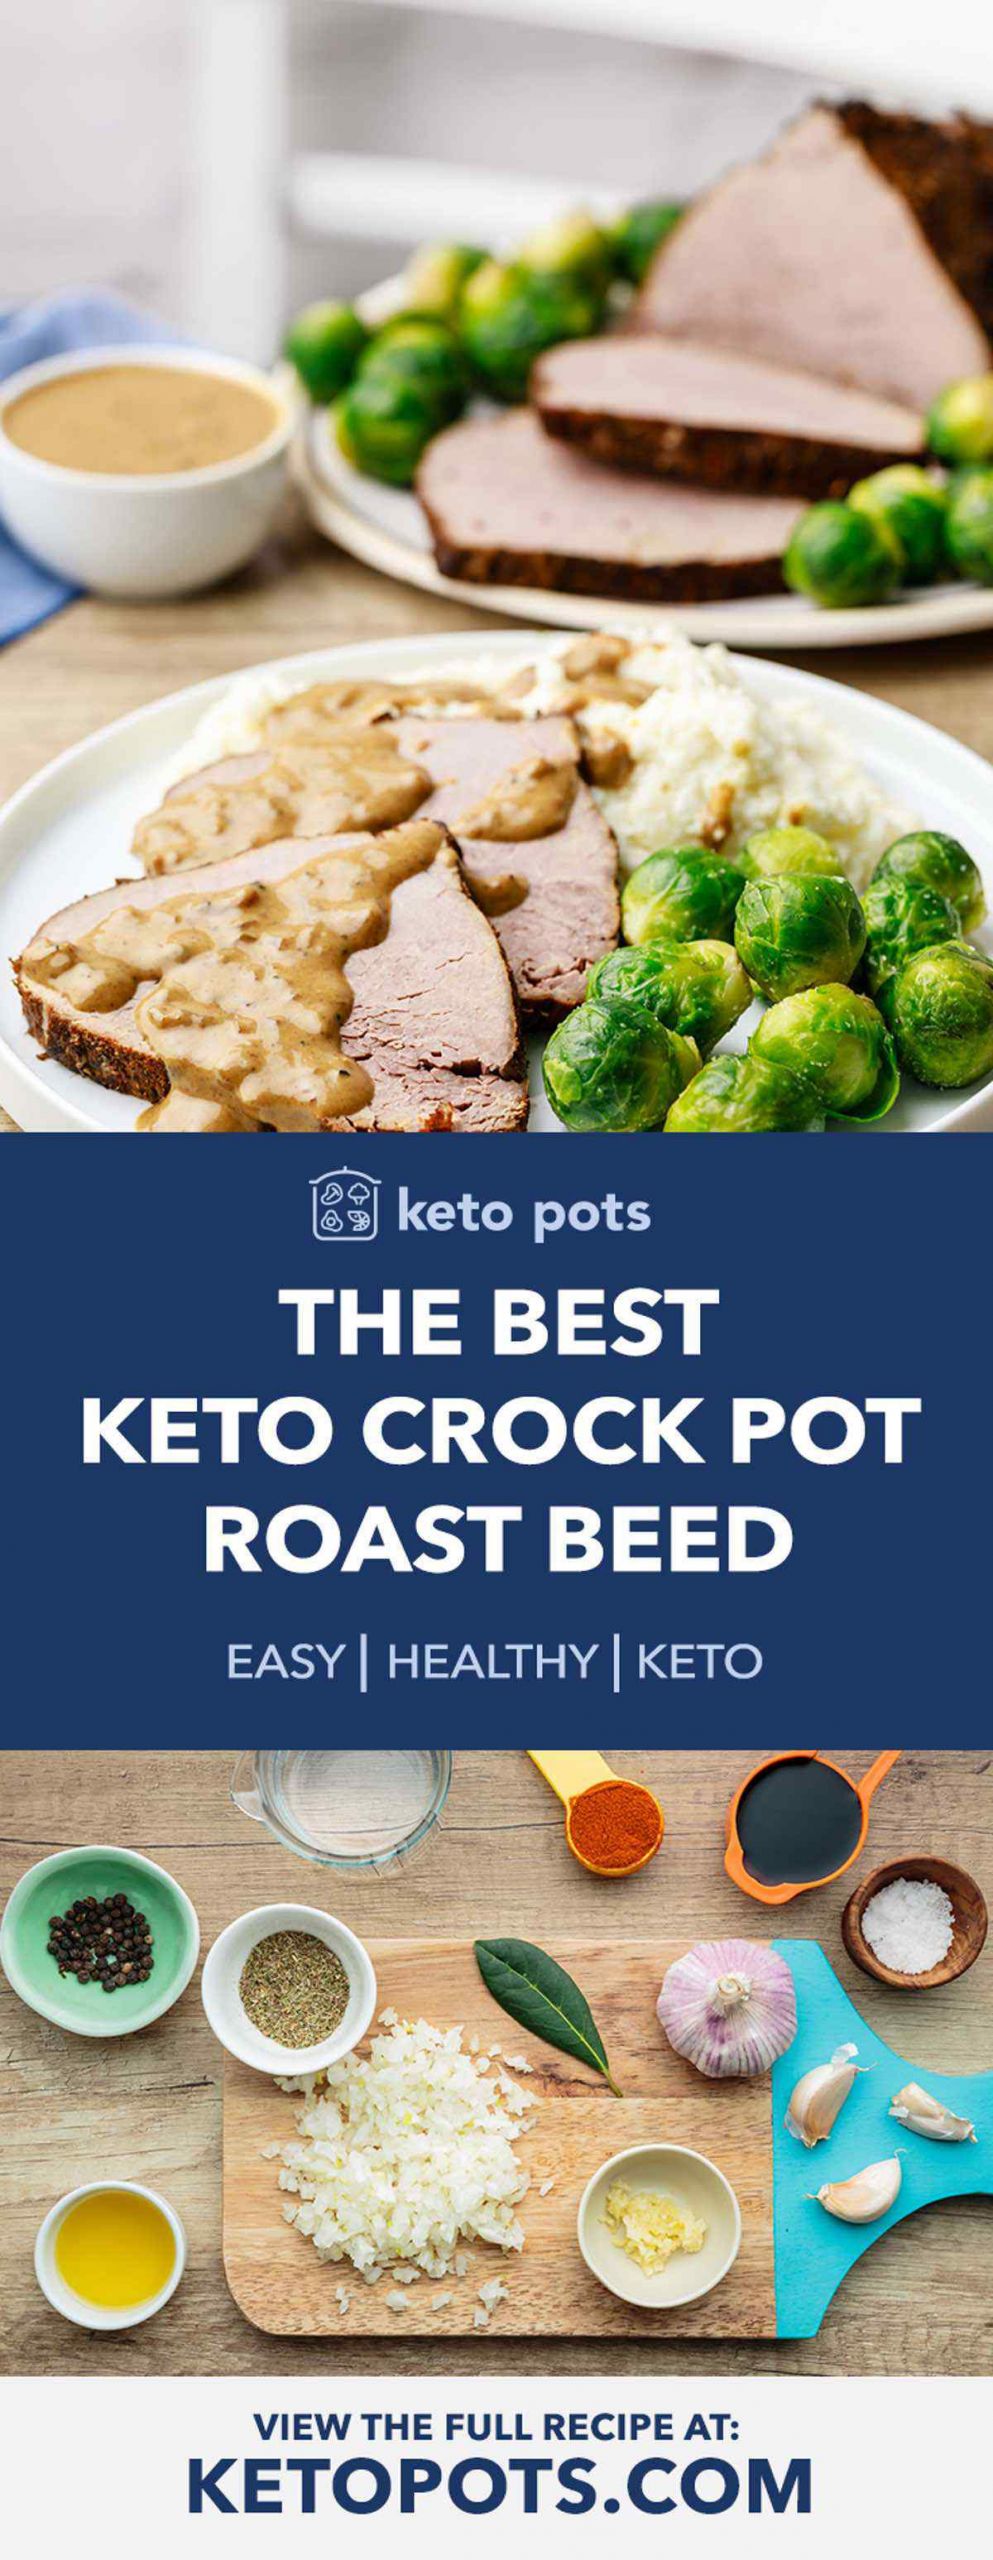 Leftover Roast Beef Keto
 The Most Tender Crockpot Roast Beef Ever Makes the Best